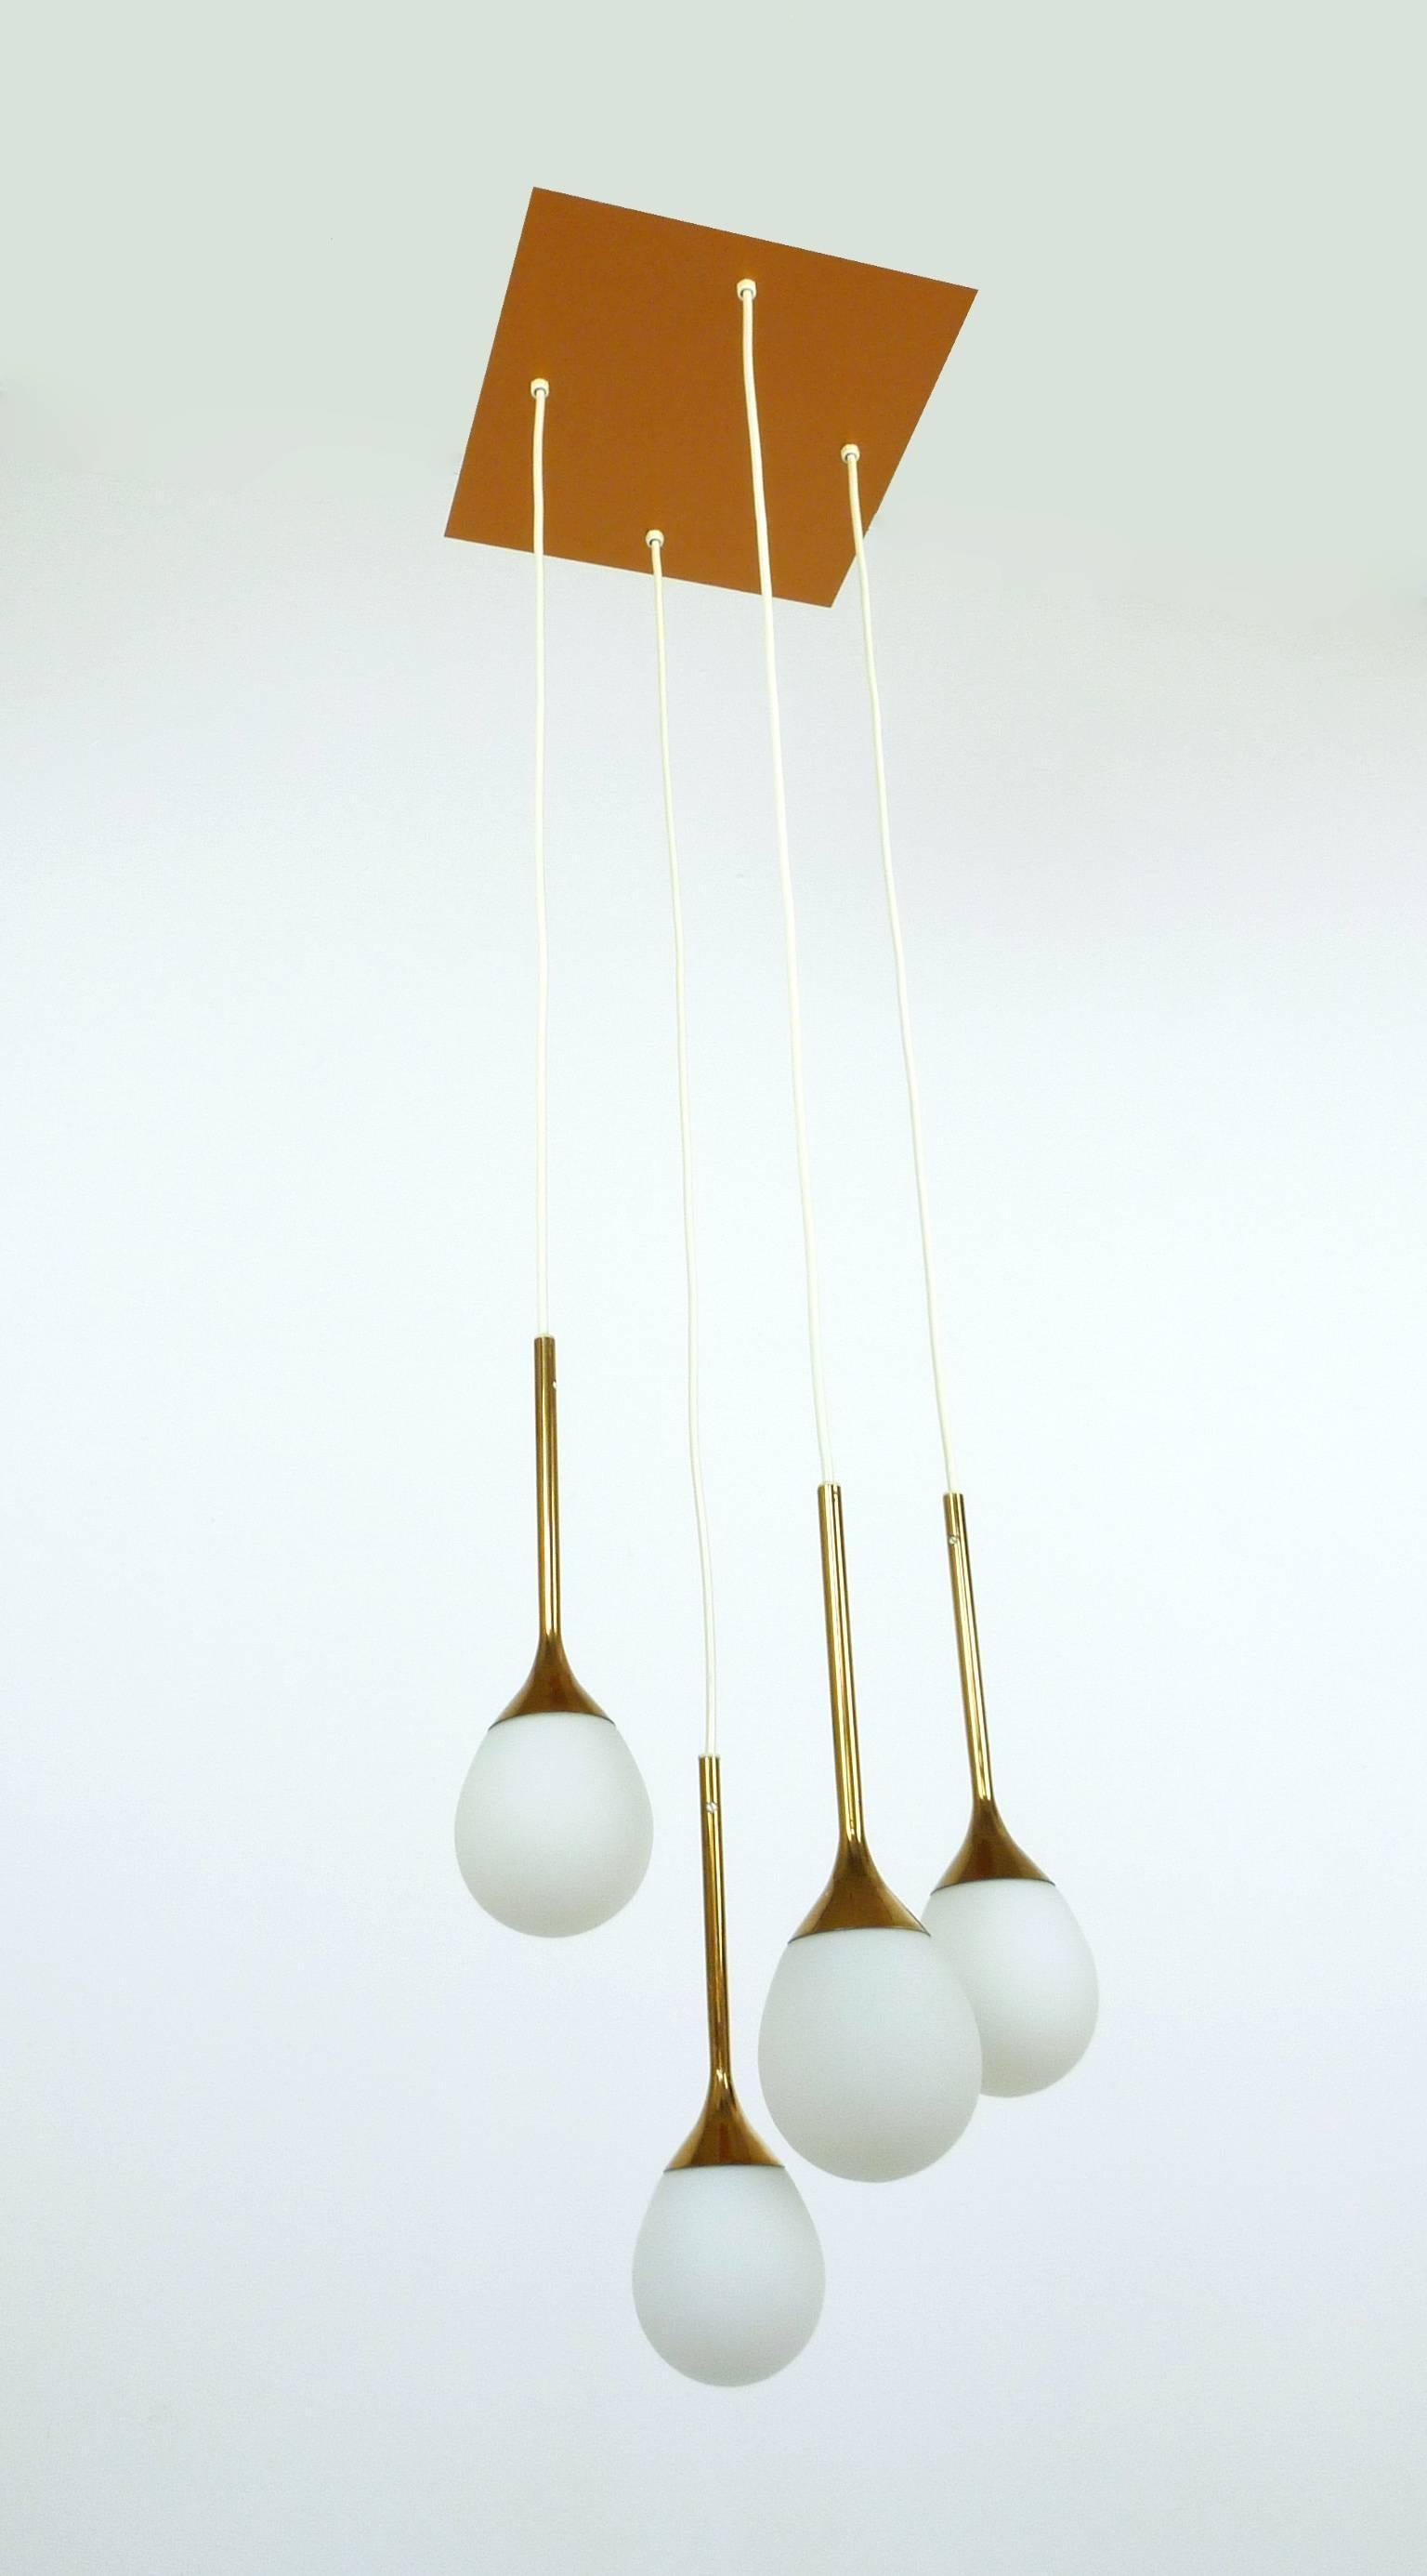 This cascading pendant was made by German manufacturer Staff Leuchten in the 1960s. The lamp features a square ceiling rose with four trumpet-shaped lights each hanging in different heights. The white round glass shades feature copper tops. Each